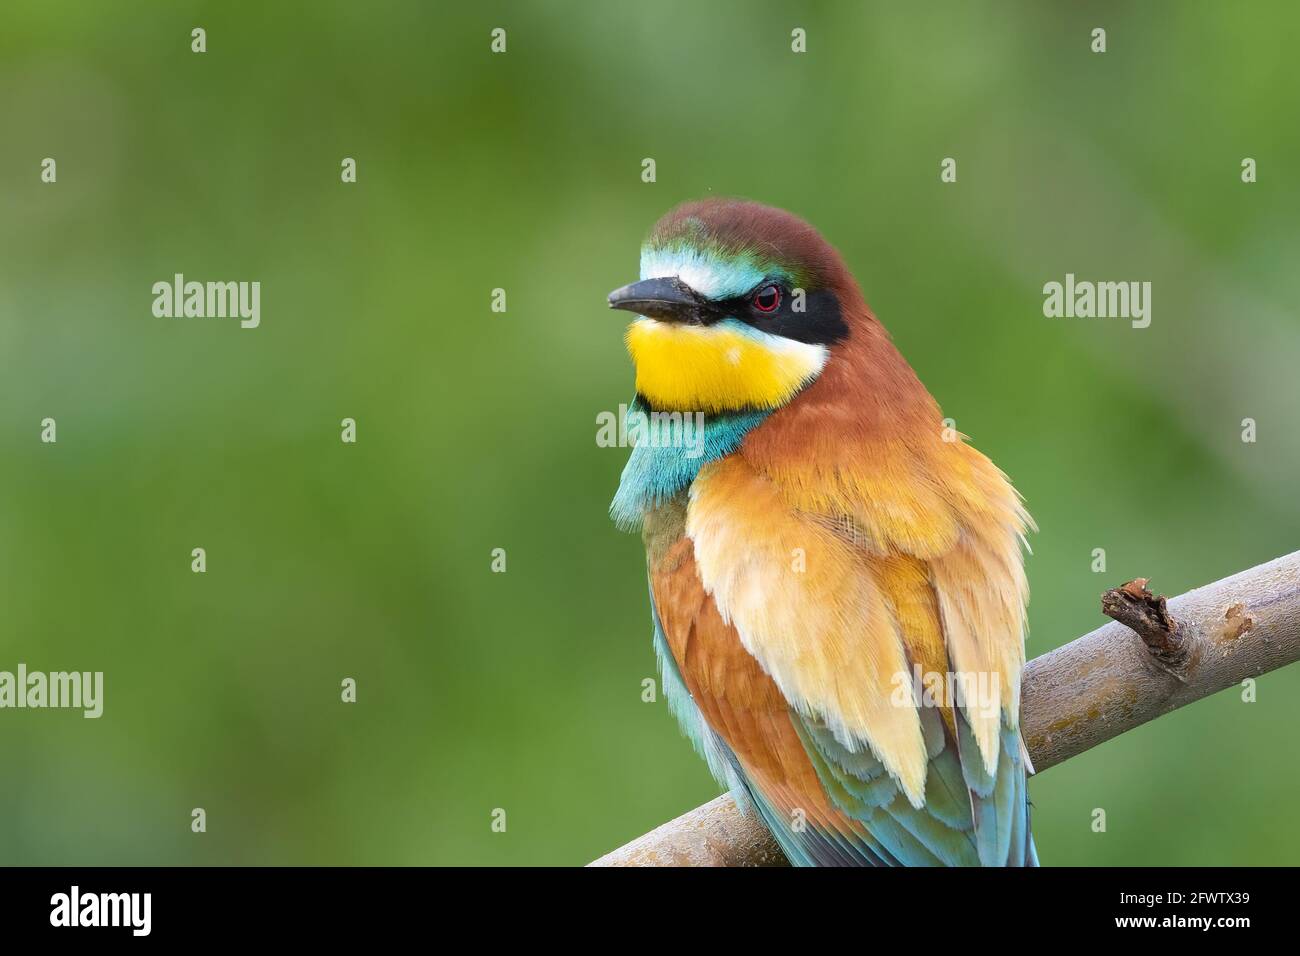 European bee eater perched on branch (Merops apiaster) closeup Stock Photo